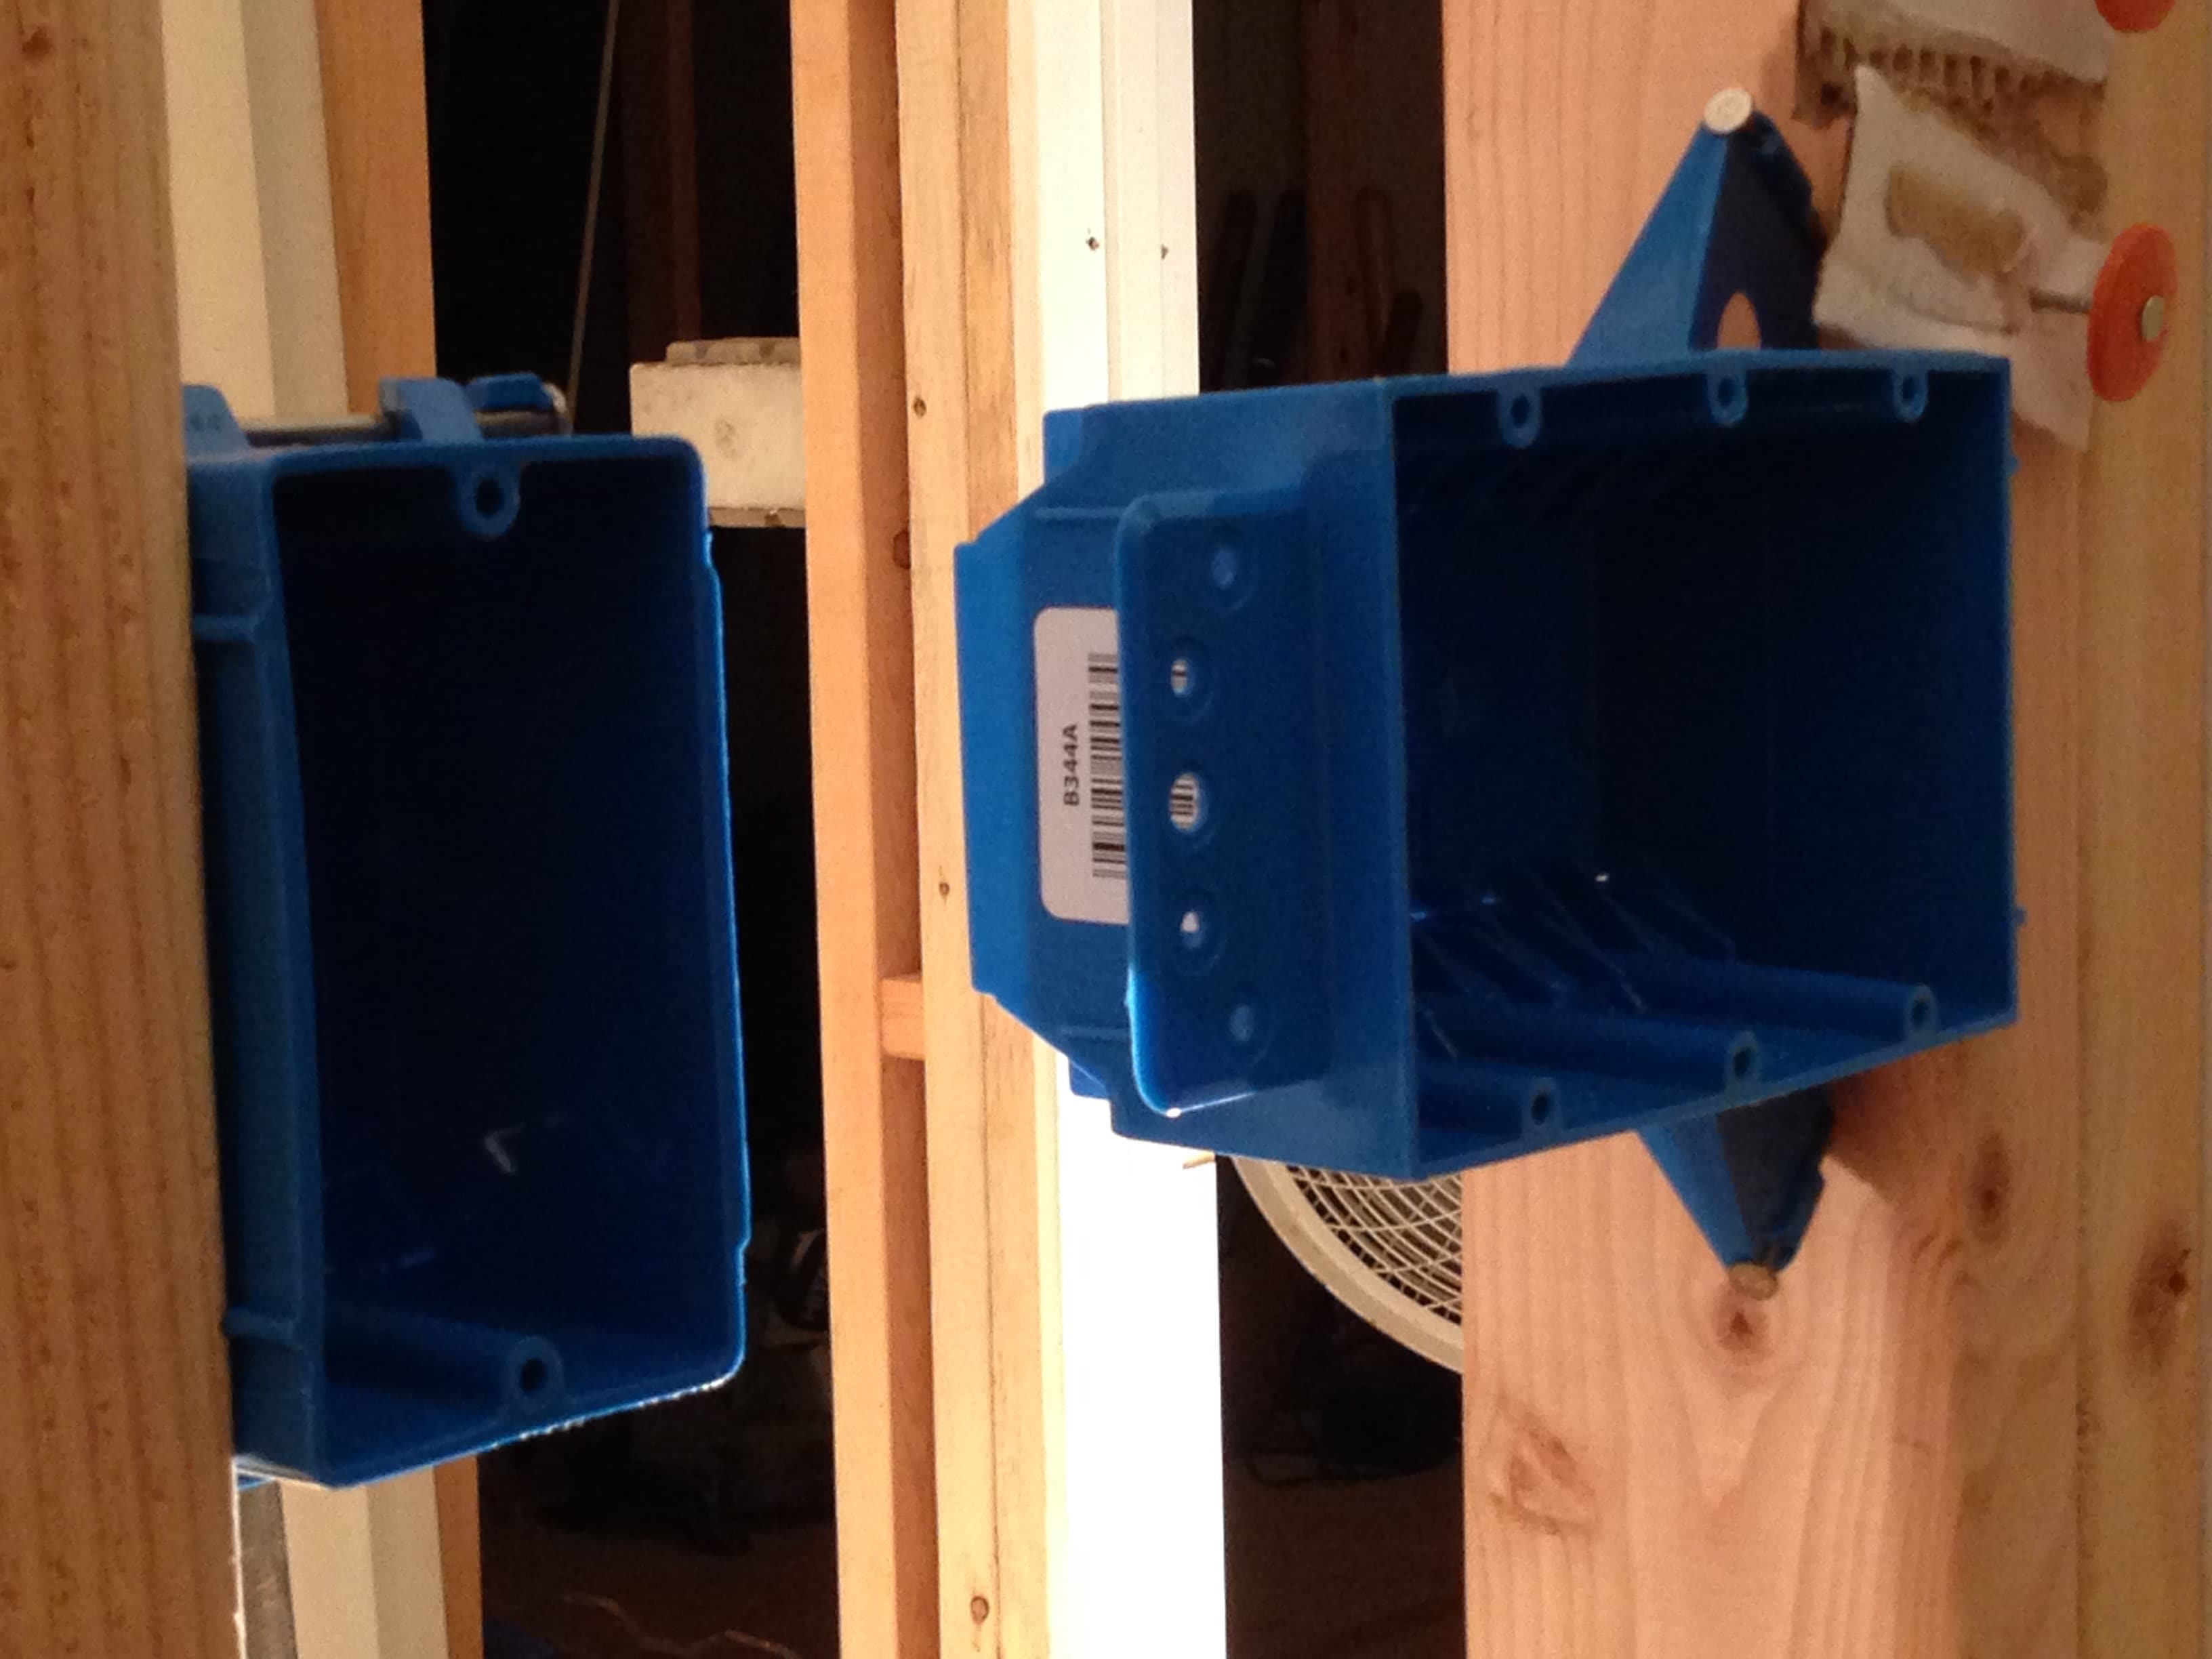 Plastic electrical boxes hung on the wall